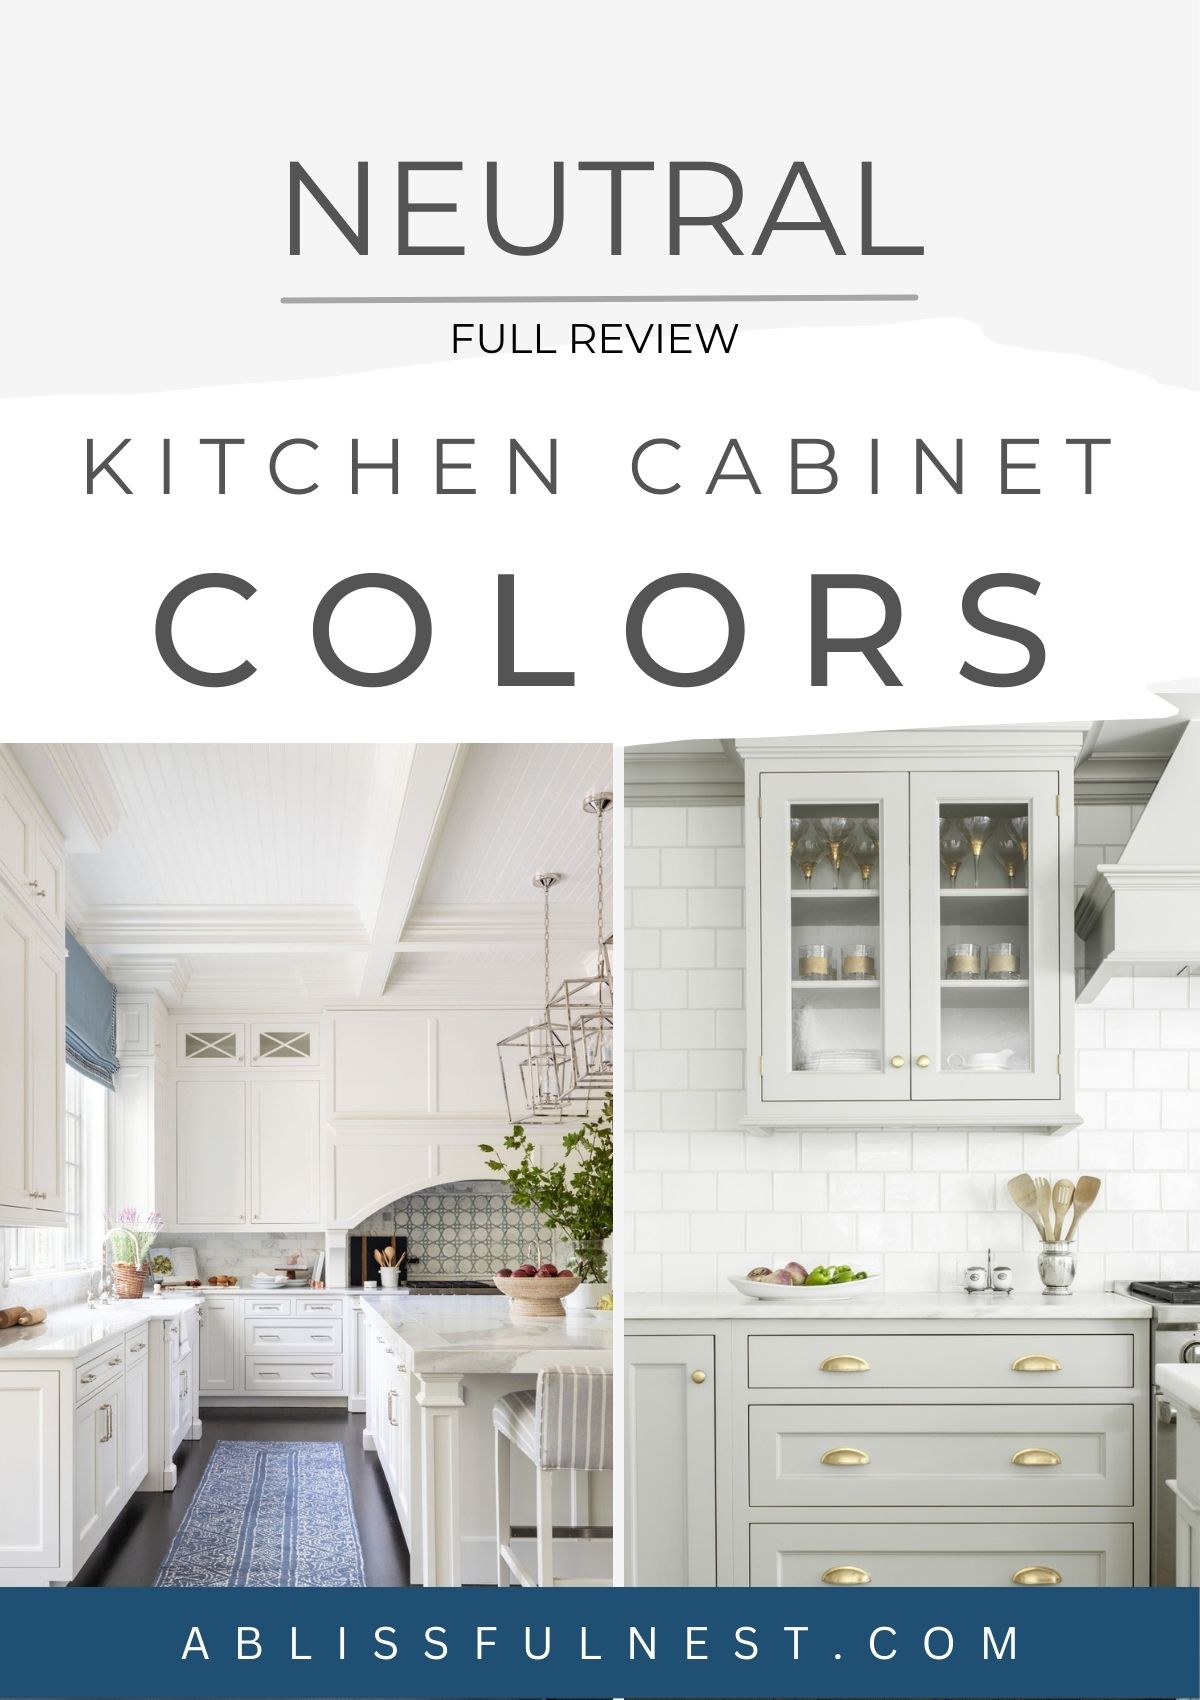 examples of what neutral paint colors look like on kitchen cabinetry